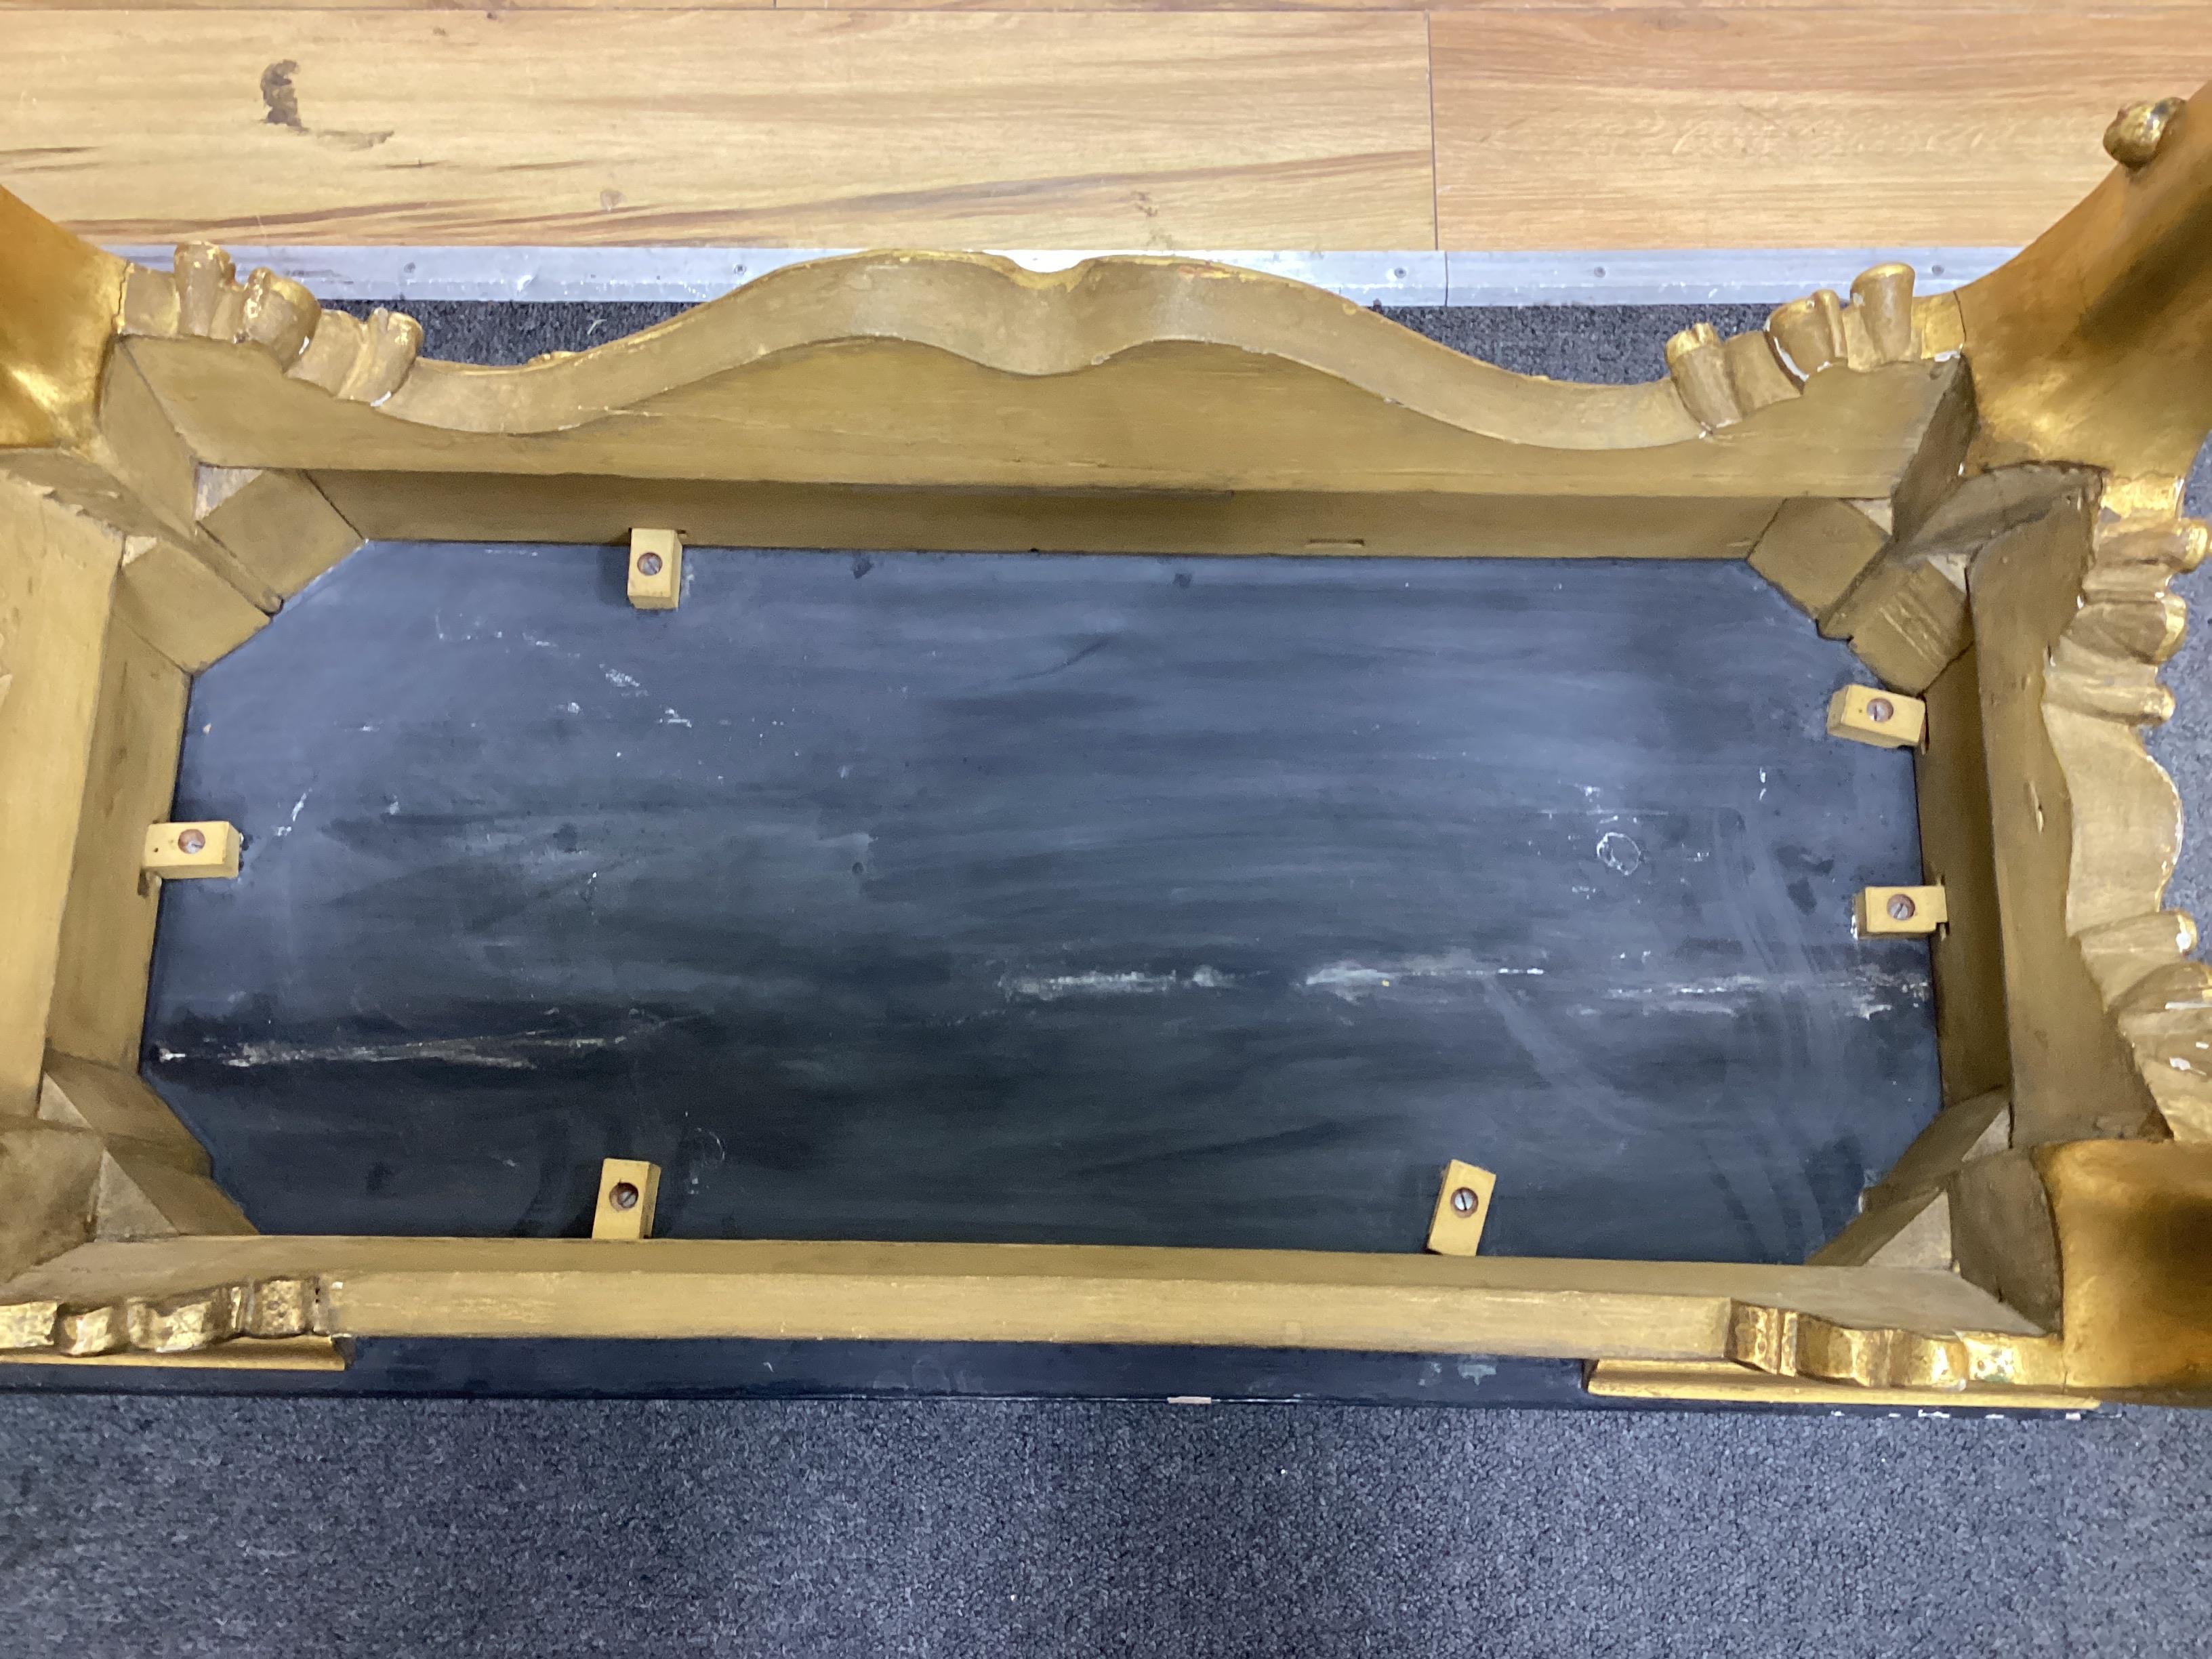 A George II style giltwood pier table, width 91cm, depth 45cm, height 79cm and a similar pier glass, width 61cm, height 115cm